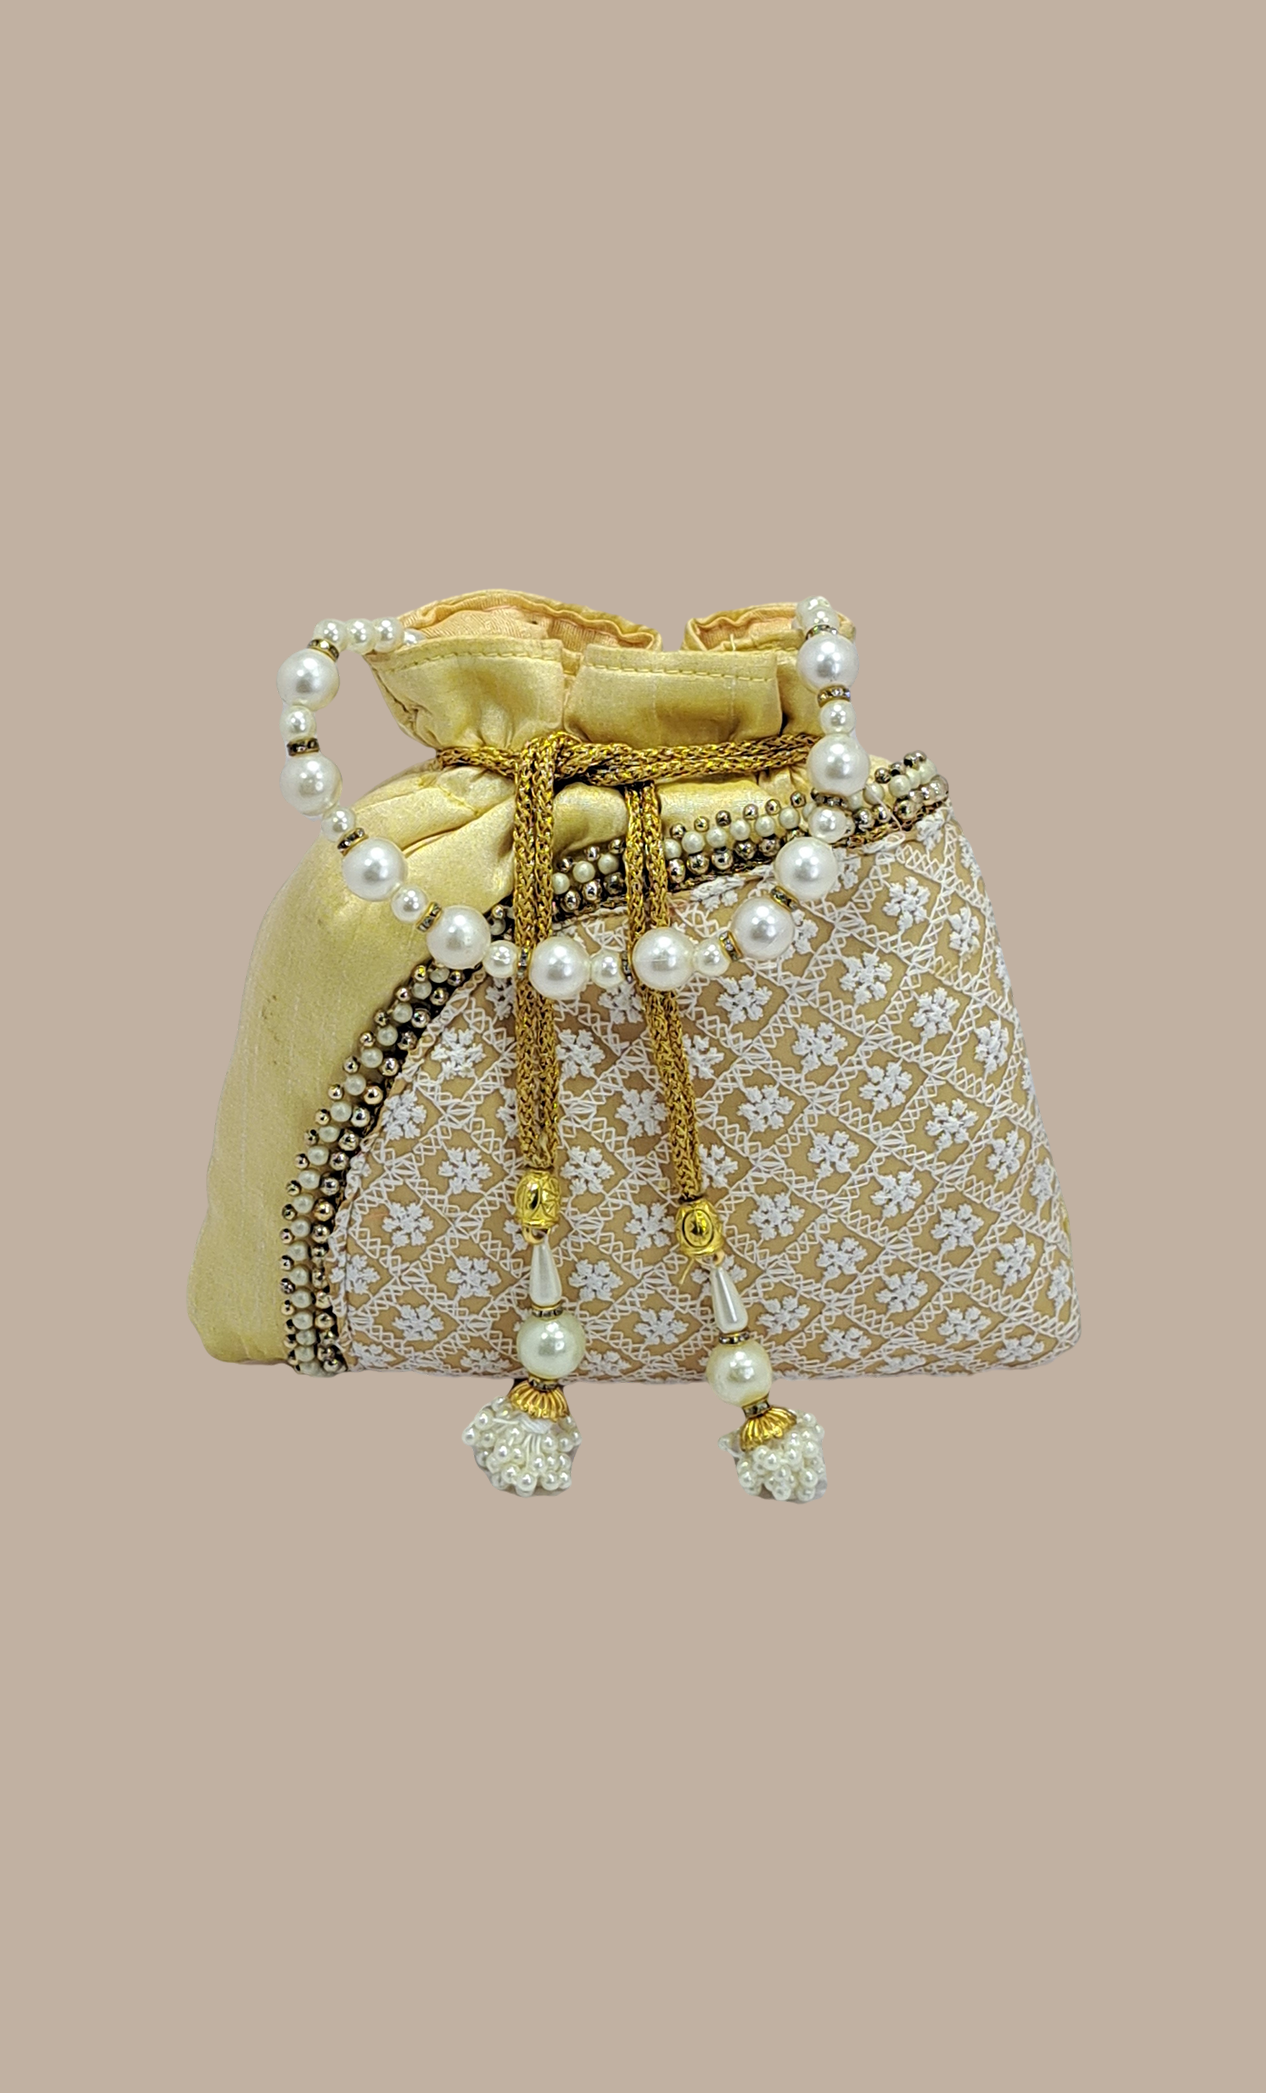 Lemon Embroidered Pouch Bag